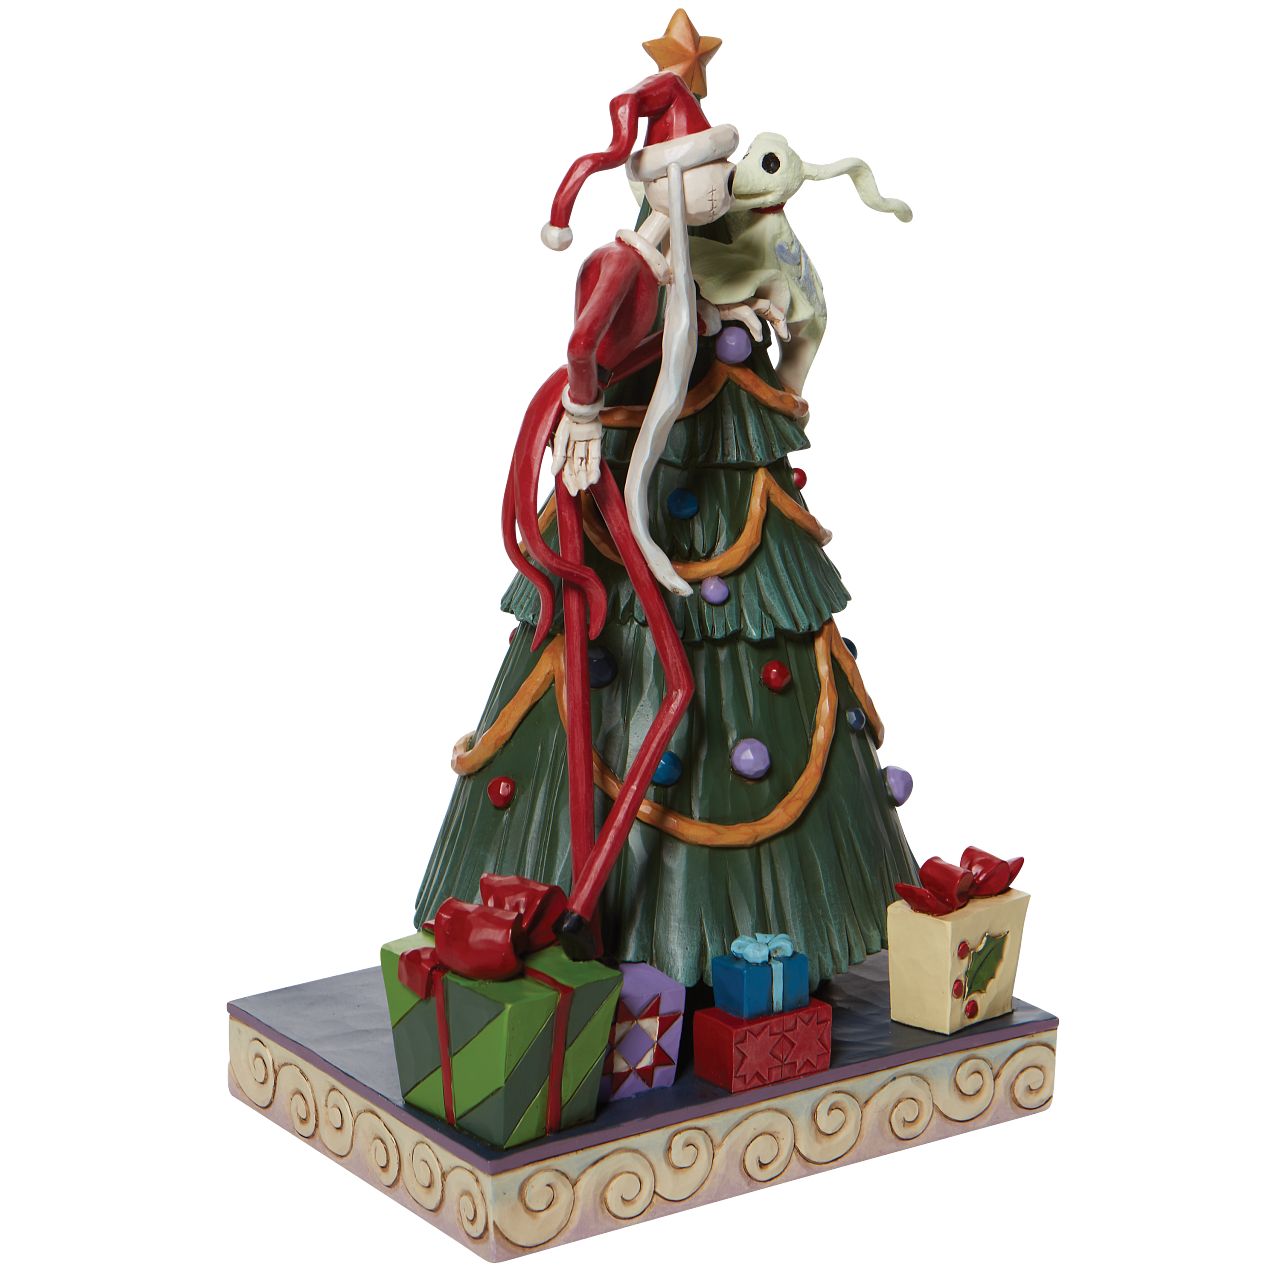 Nightmare Before Christmas Santa Jack with Zero by Tree Figurine  "Decking the Halls" Dressed as Santa Claus, Jack Skellington and his glow in the dark dog, Zero, gather around the Christmas tree. Will Jack steal the presents or will he be inspired by the giving season?